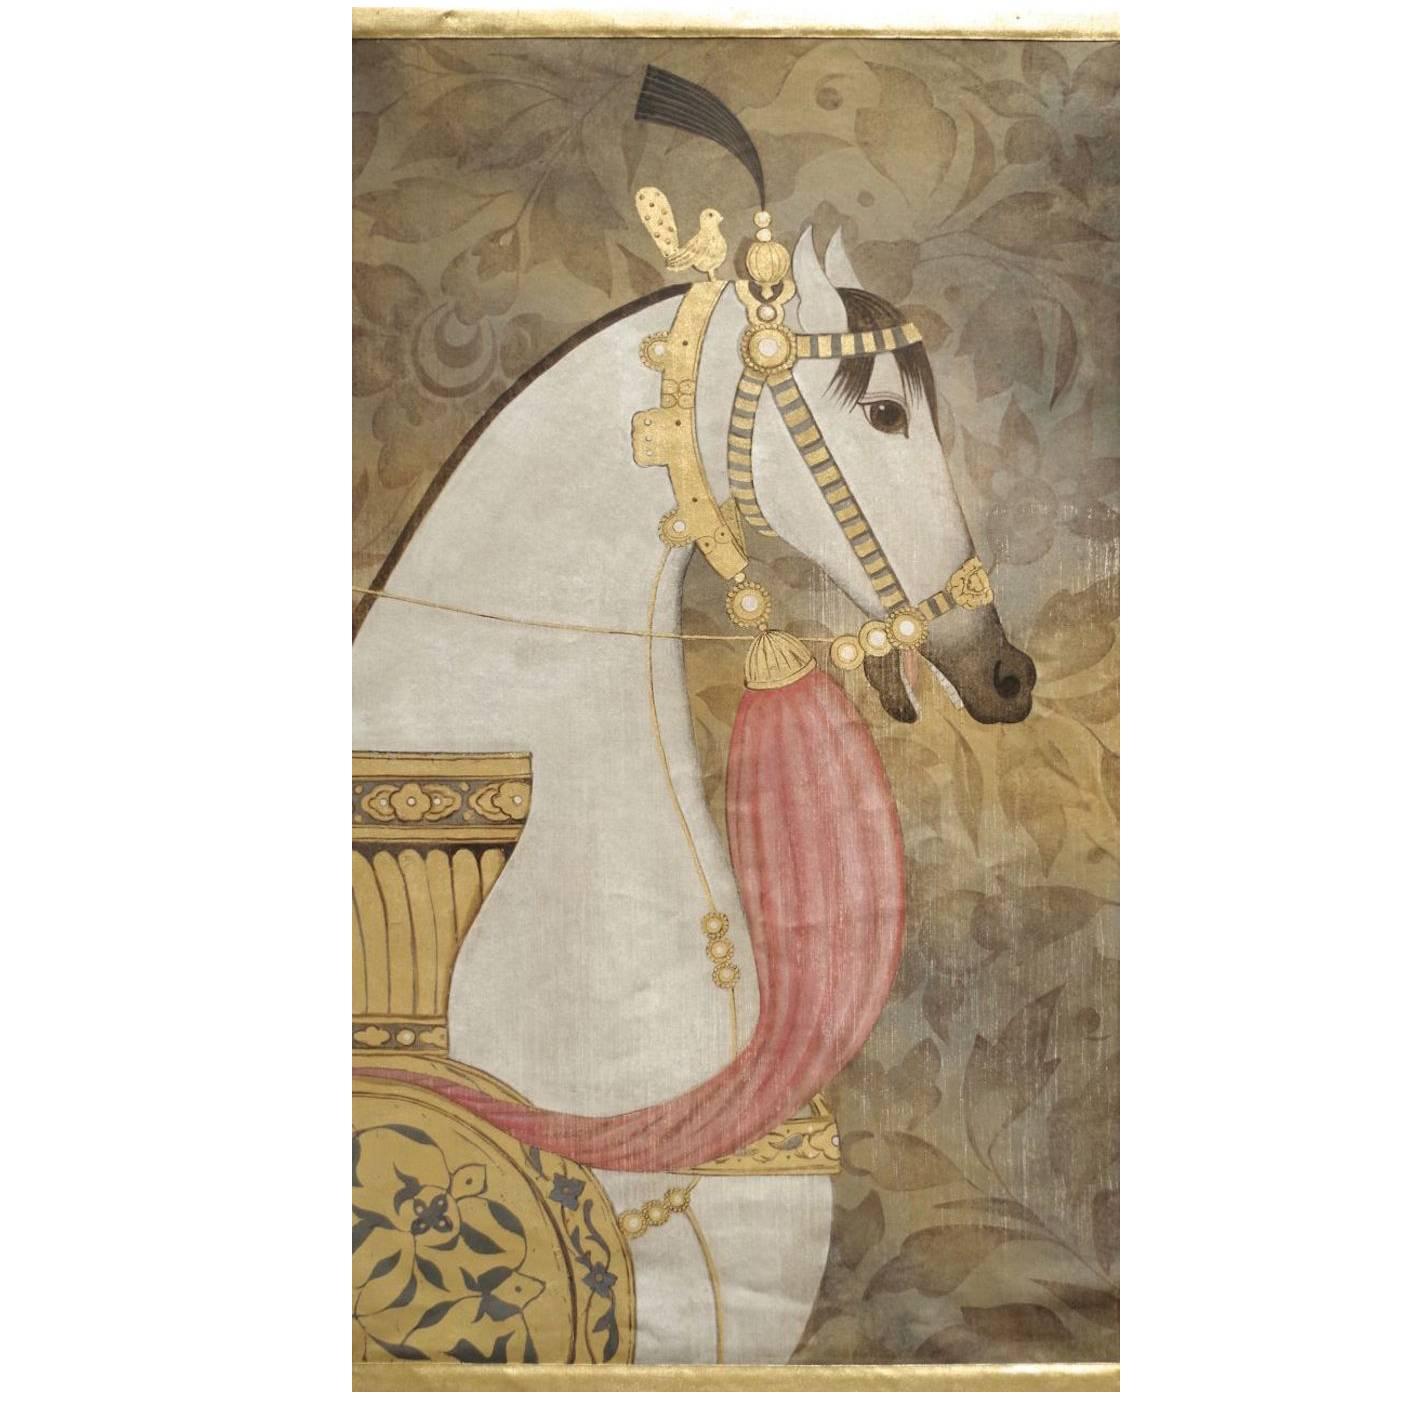 Equestrian Decor Portrait, Painted on Linen, French Contemporary Work